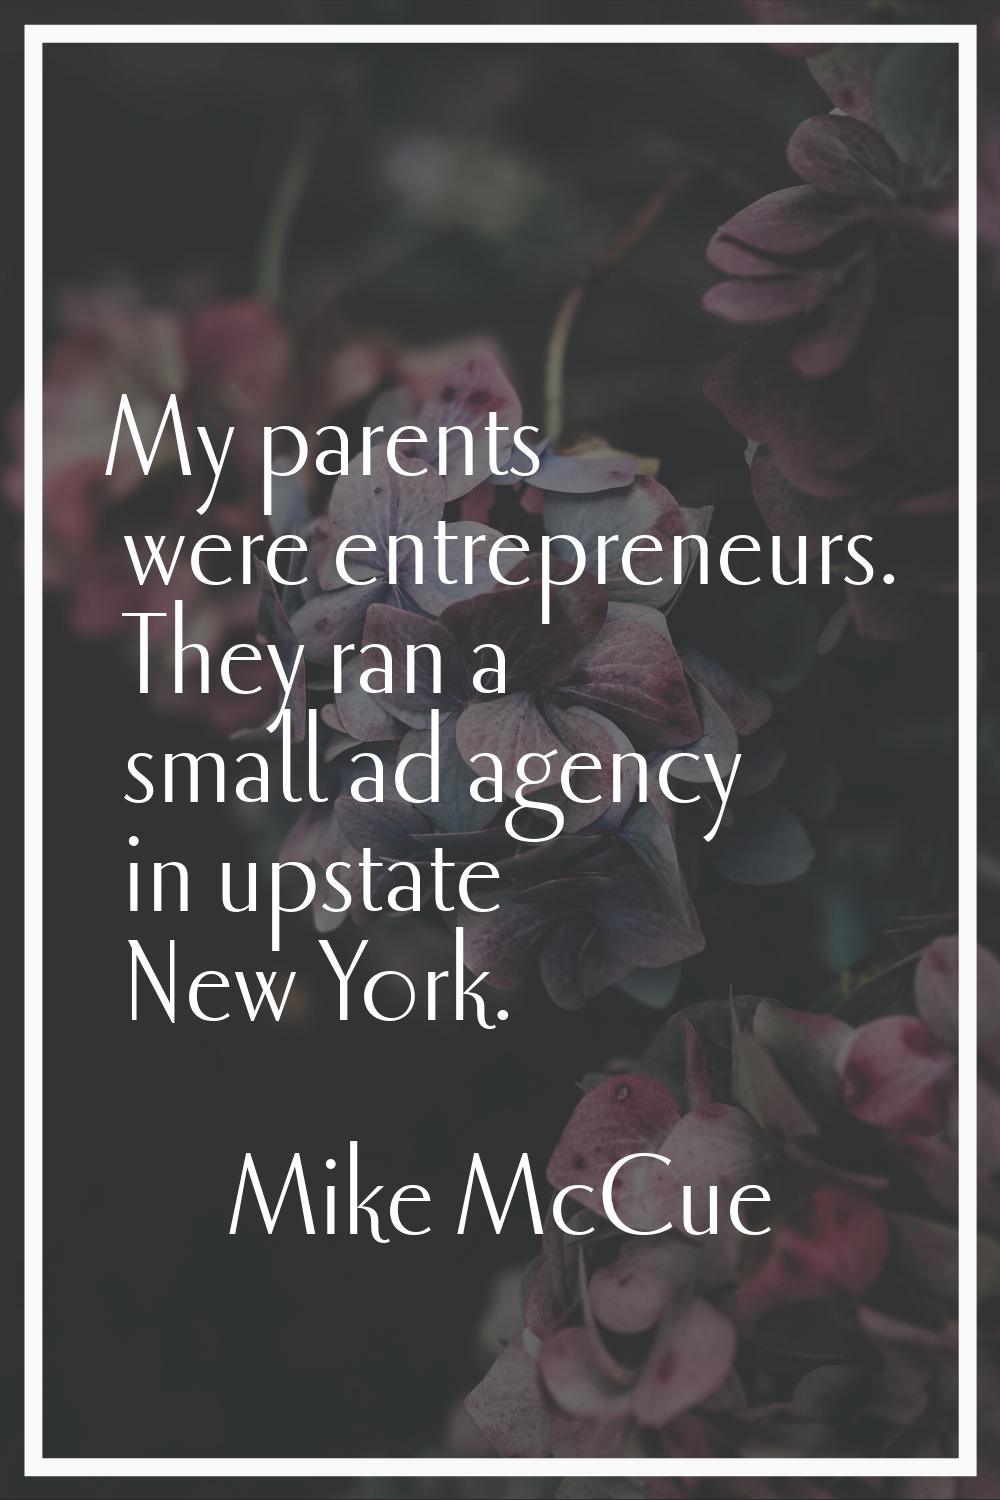 My parents were entrepreneurs. They ran a small ad agency in upstate New York.